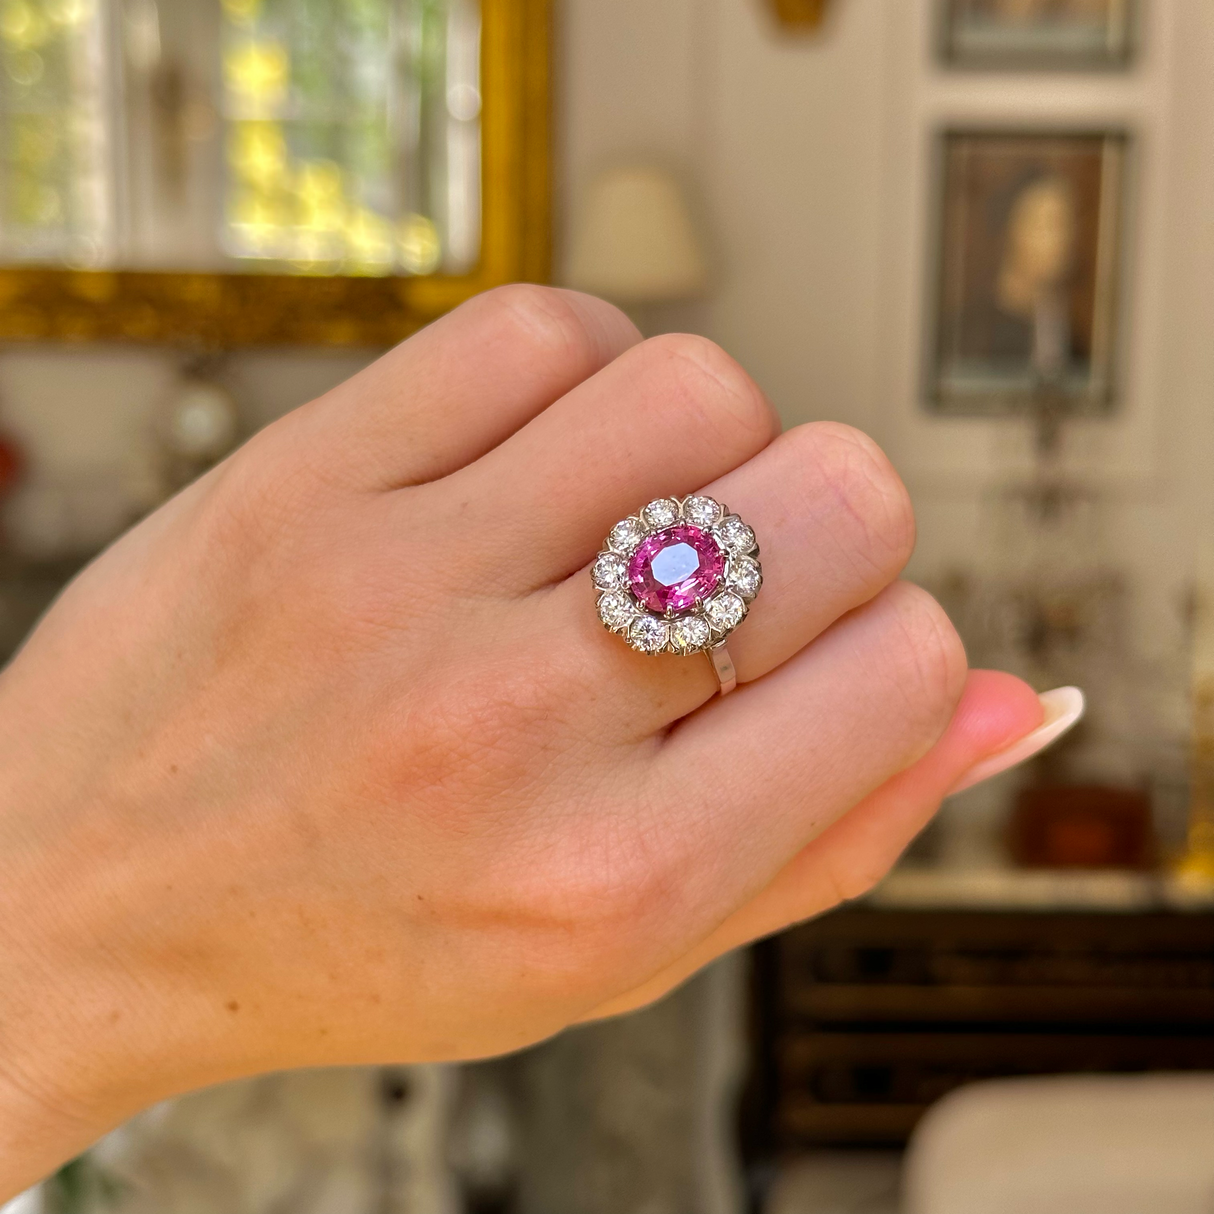 Pink sapphire and diamond cluster ring worn on closed hand.